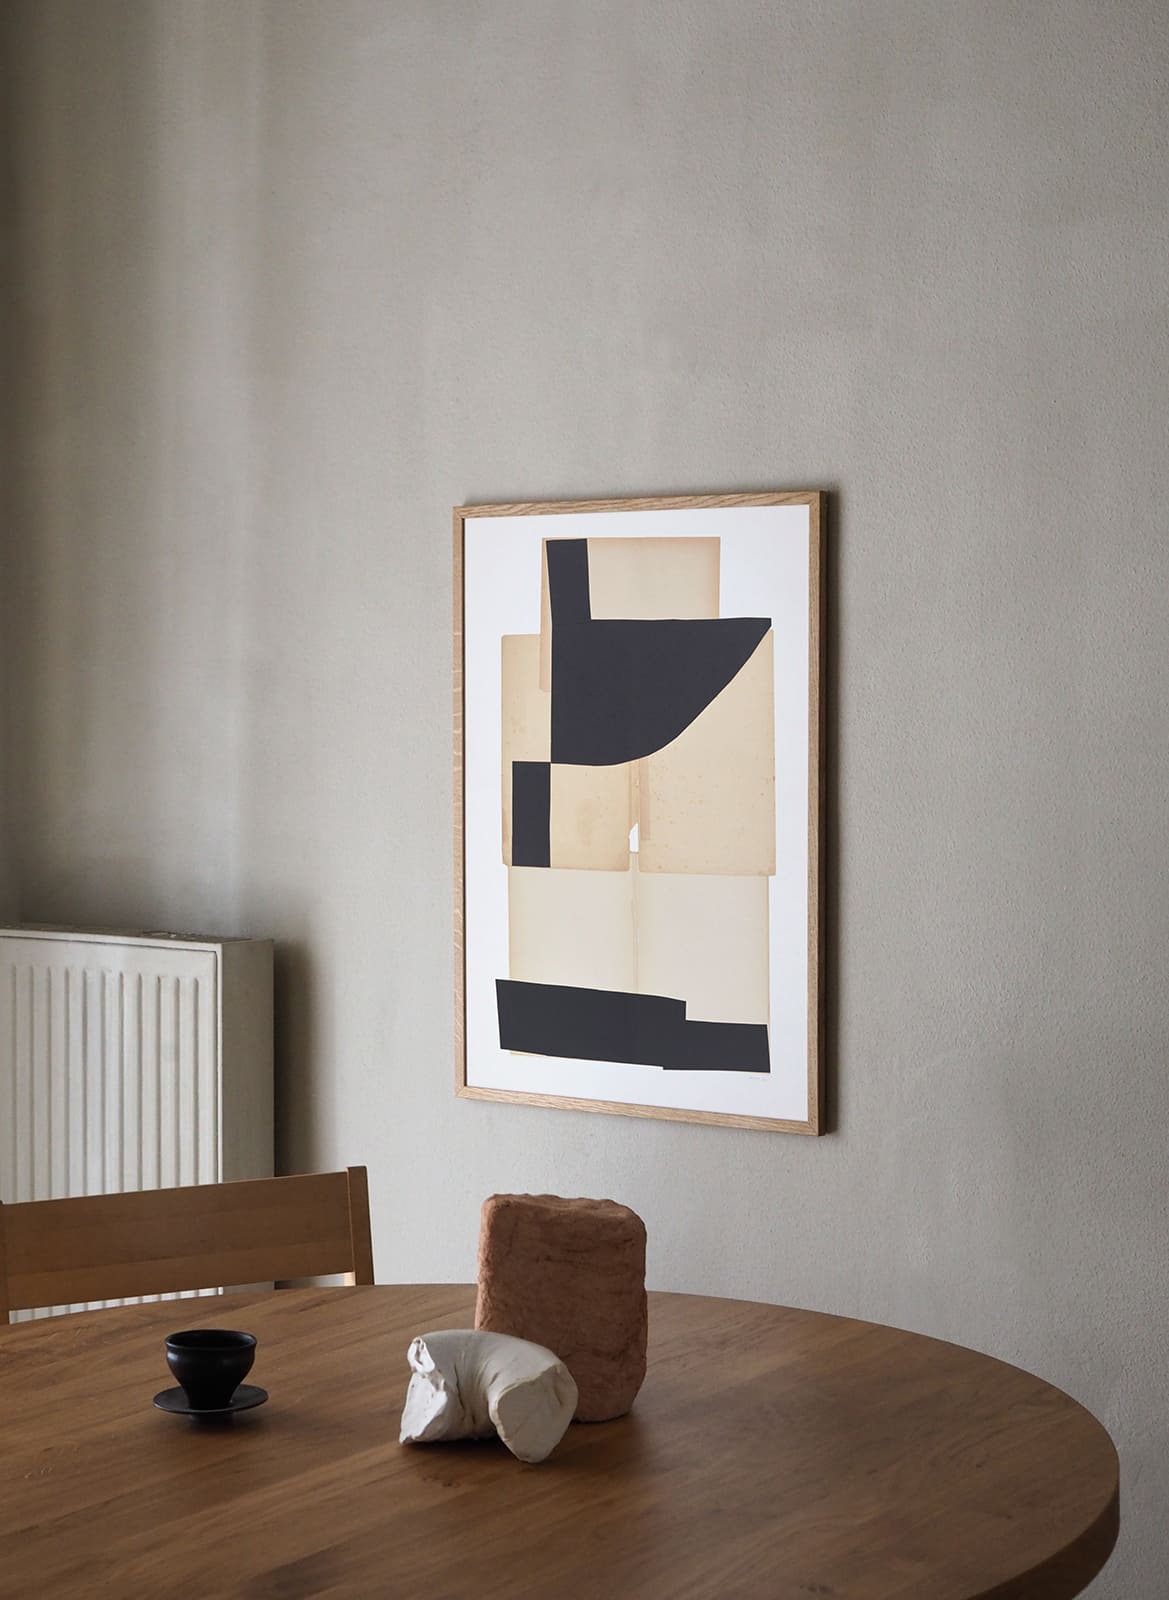   Framed minimalistic poster hanging above dining table by Atelier Cph